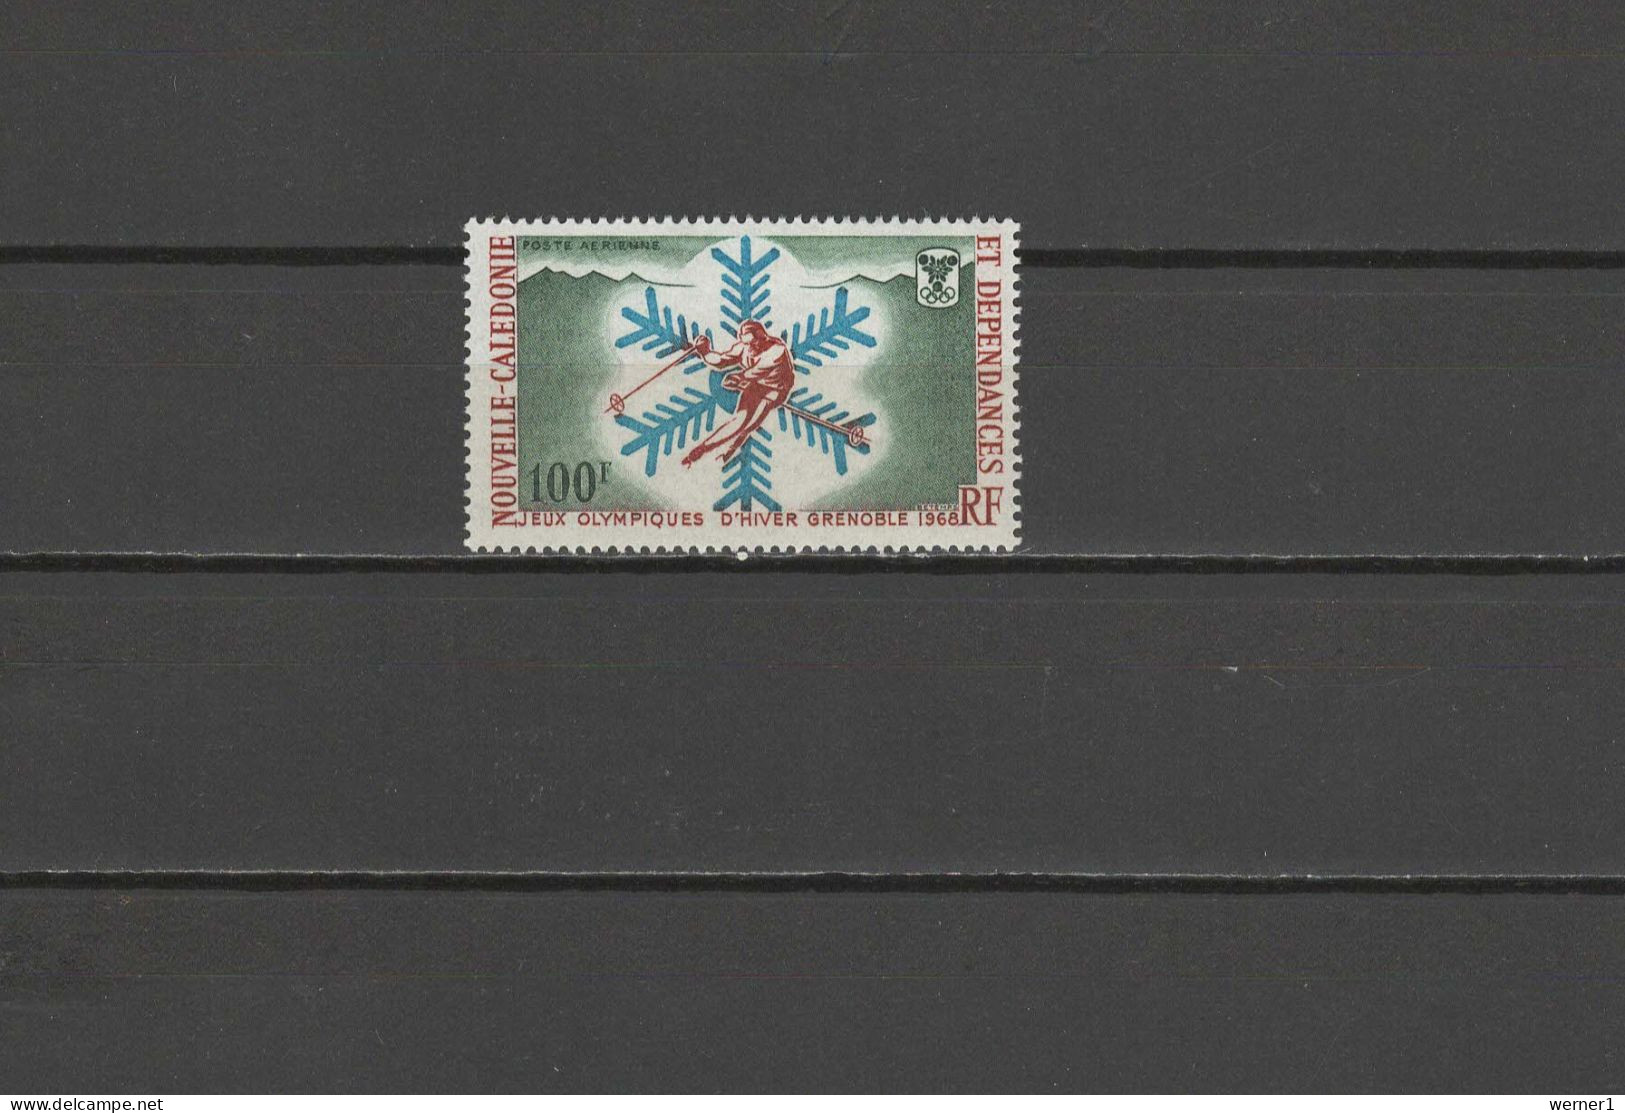 New Caledonia 1967 Olympic Games Grenoble Stamp MNH - Winter 1968: Grenoble